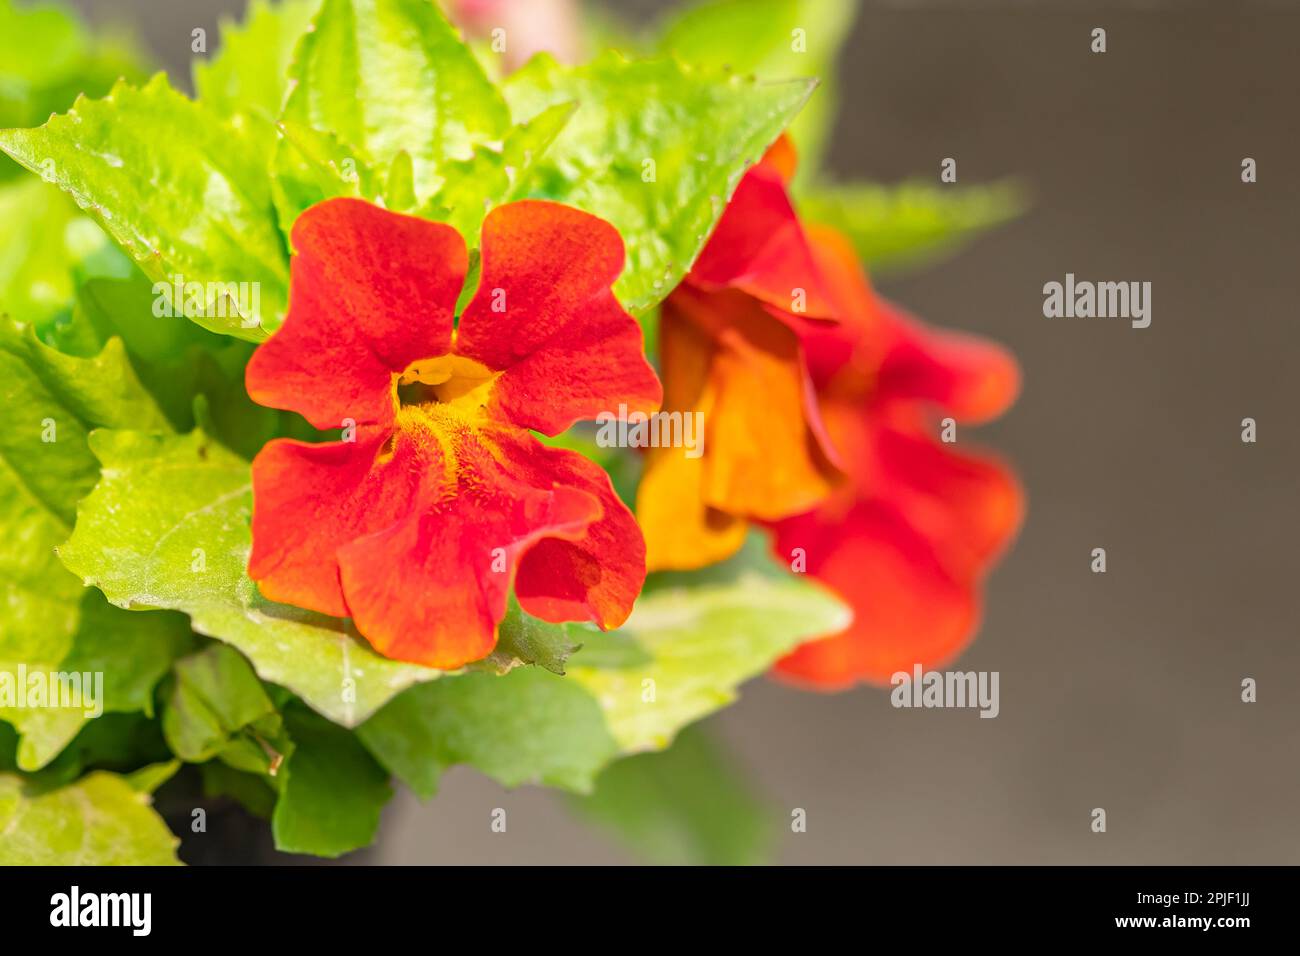 Mimulus flower blooming in garden Stock Photo